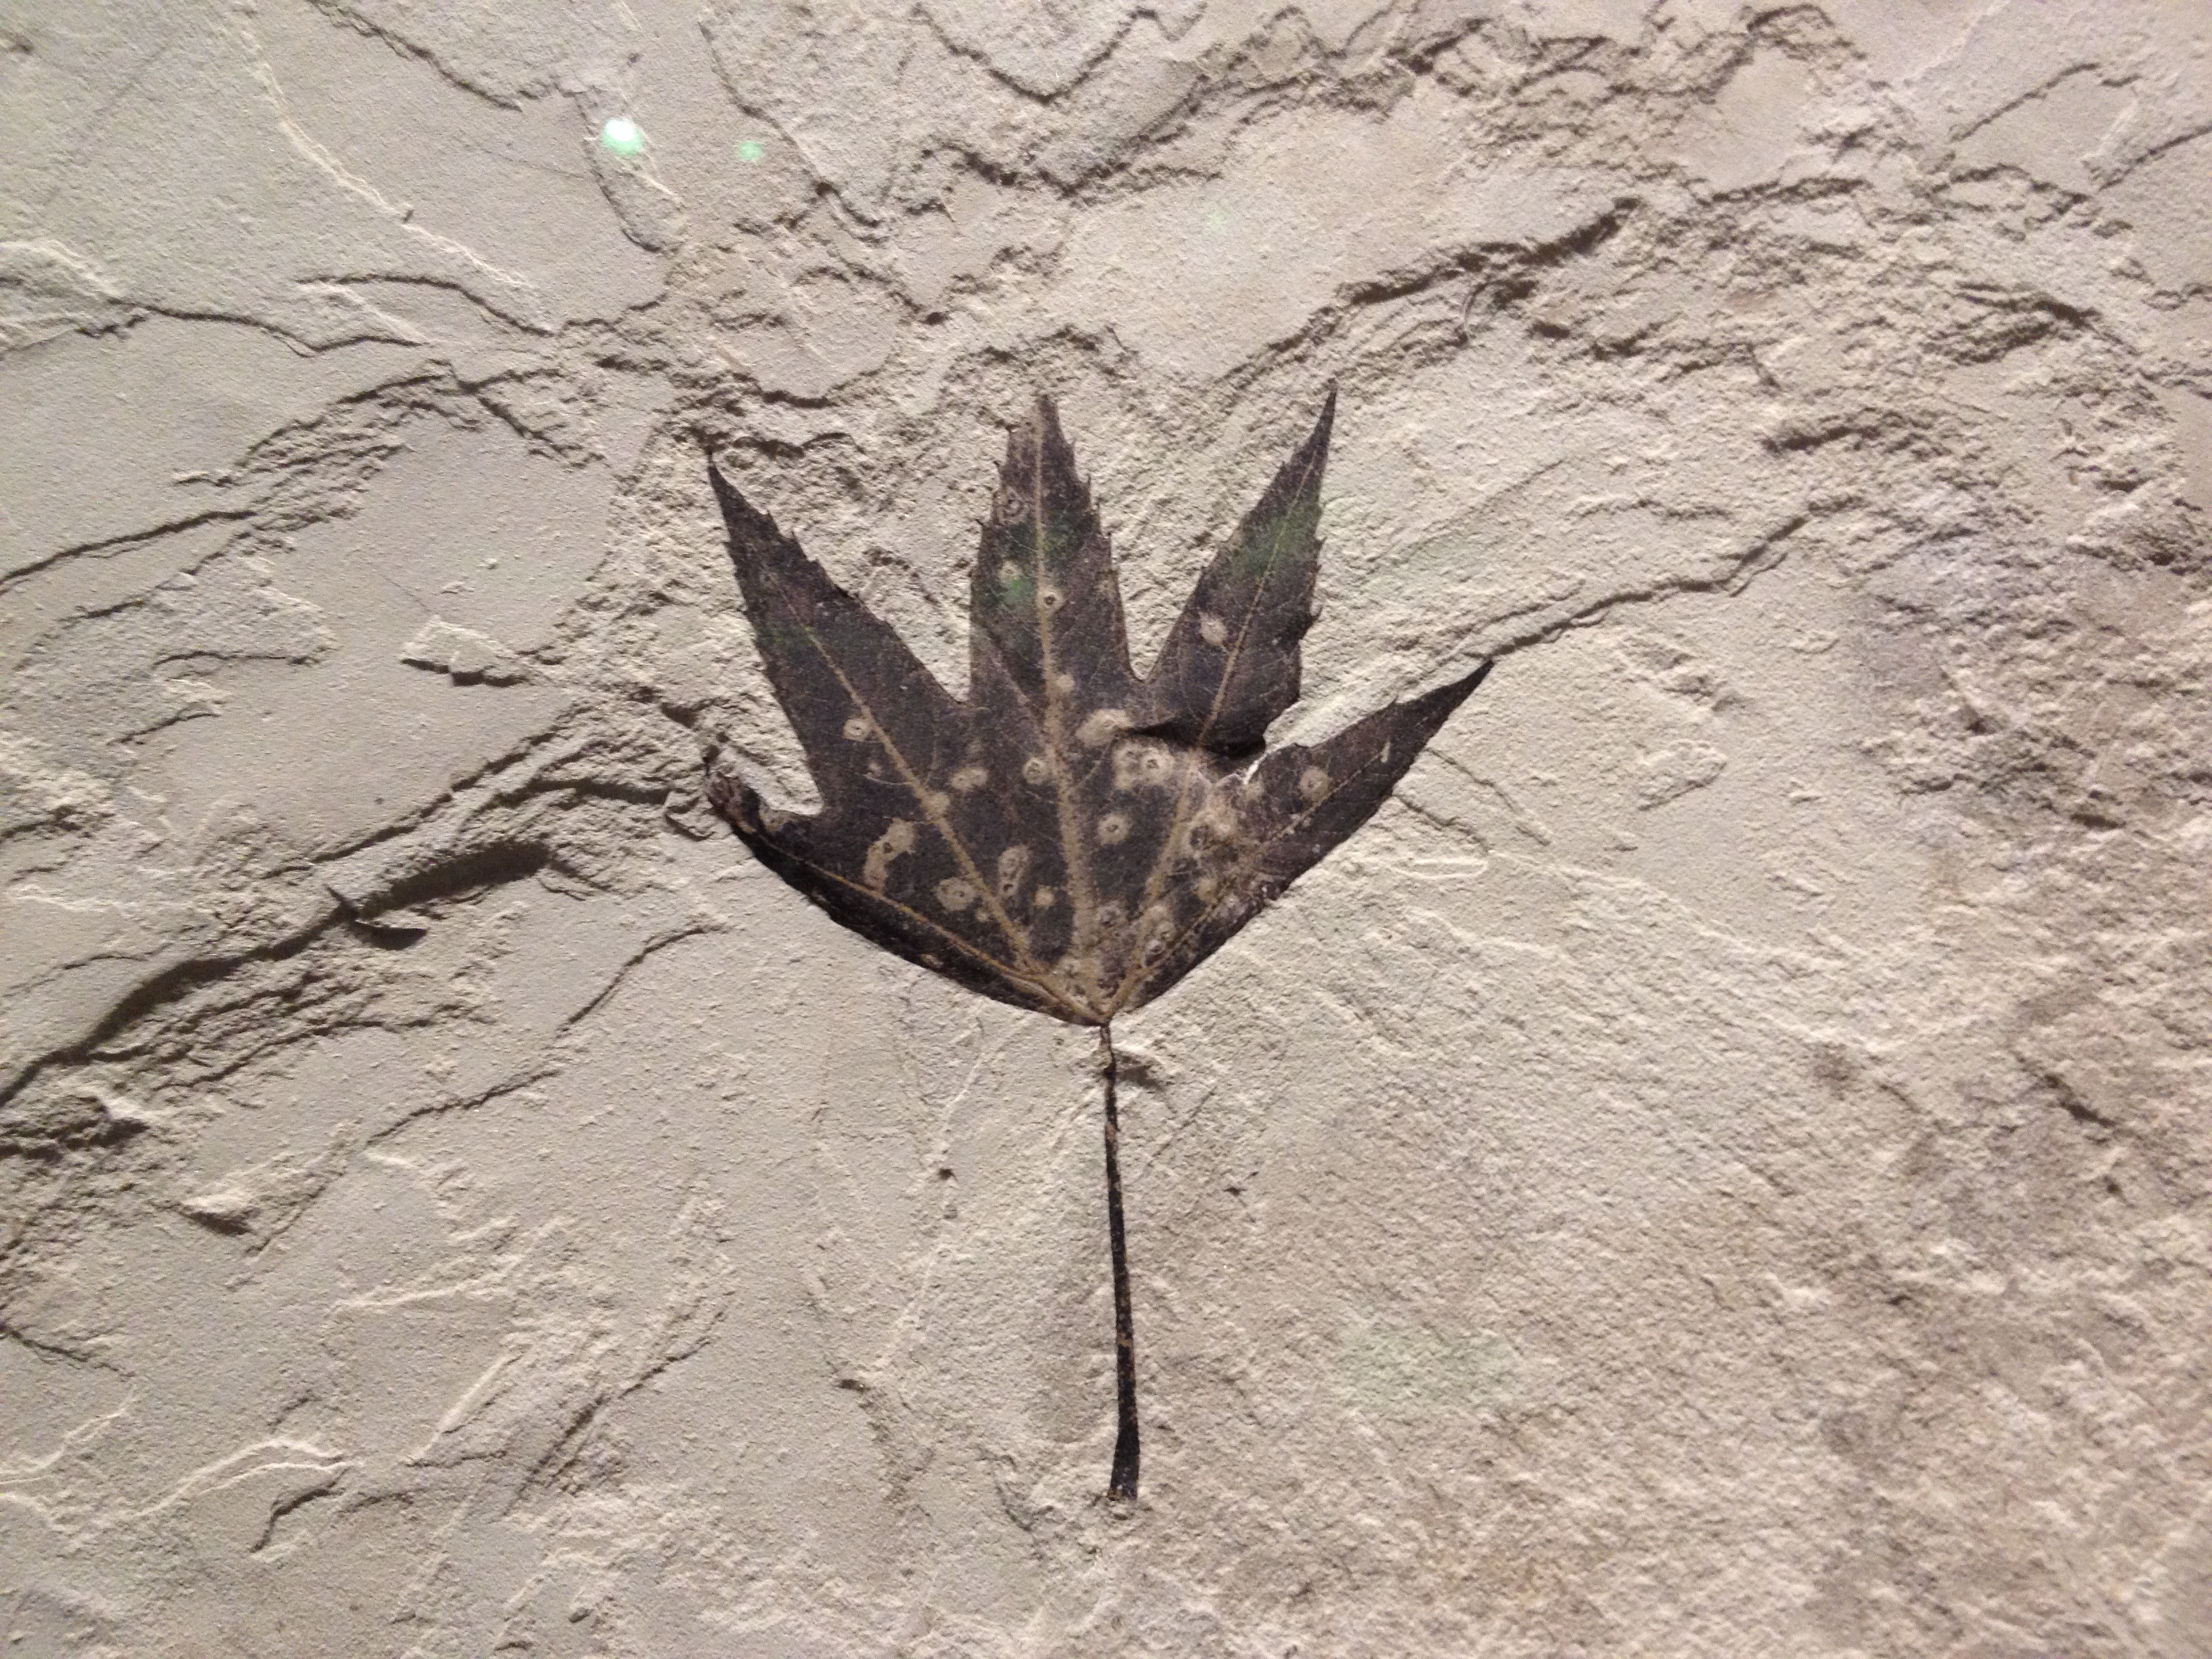 A carbonized fossil plant leaf from the Eocene Green River Formation